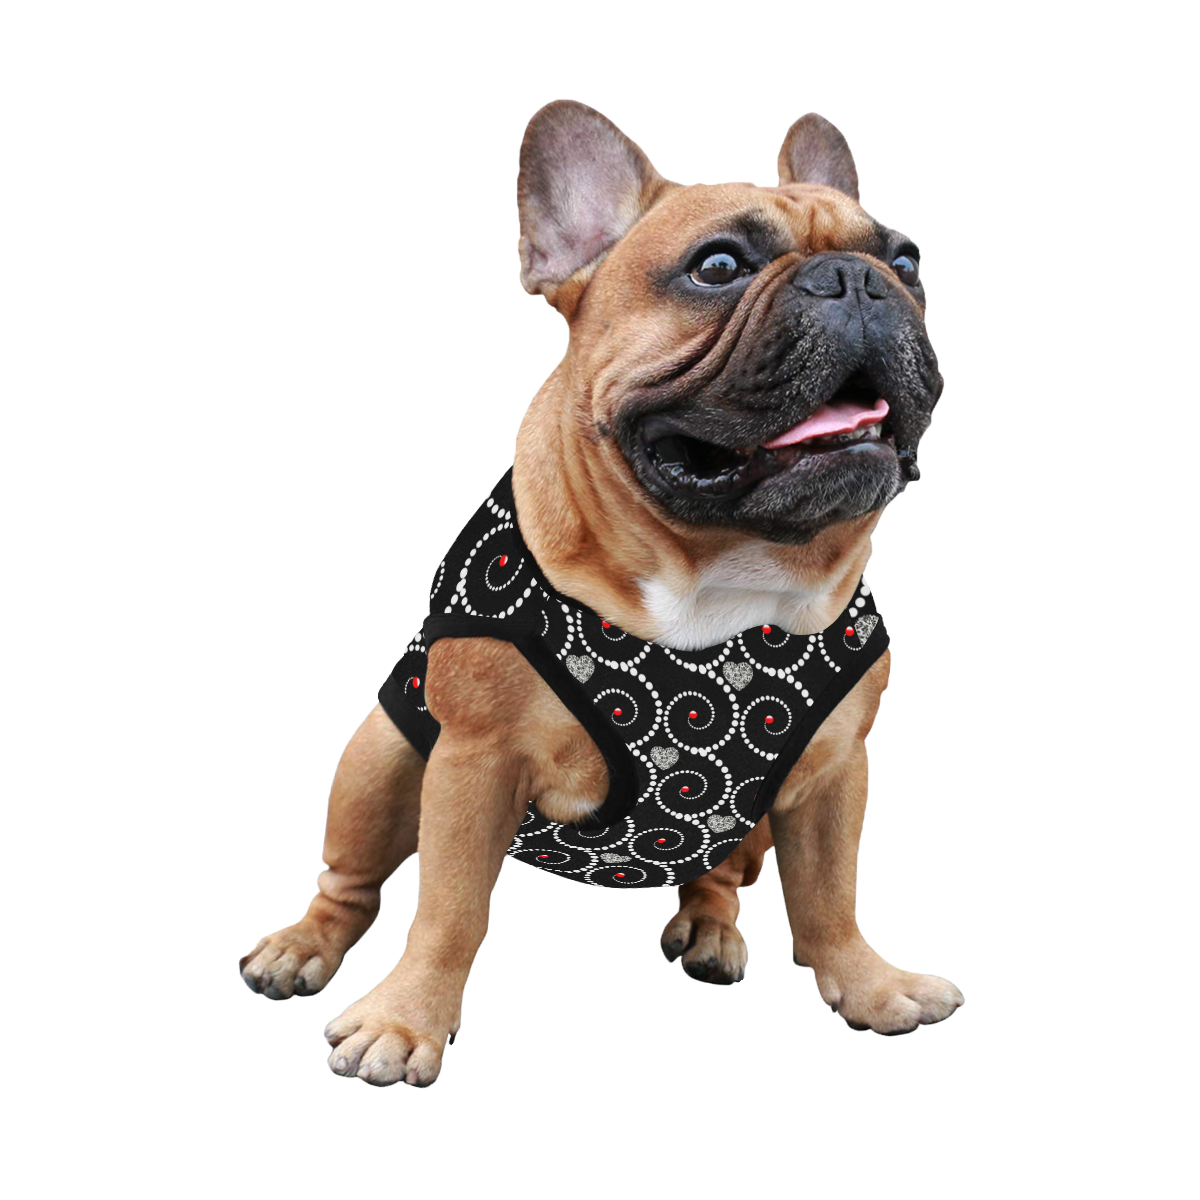 Silver hearts and pearls of white -black dog coat All Over Print Pet Tank Top